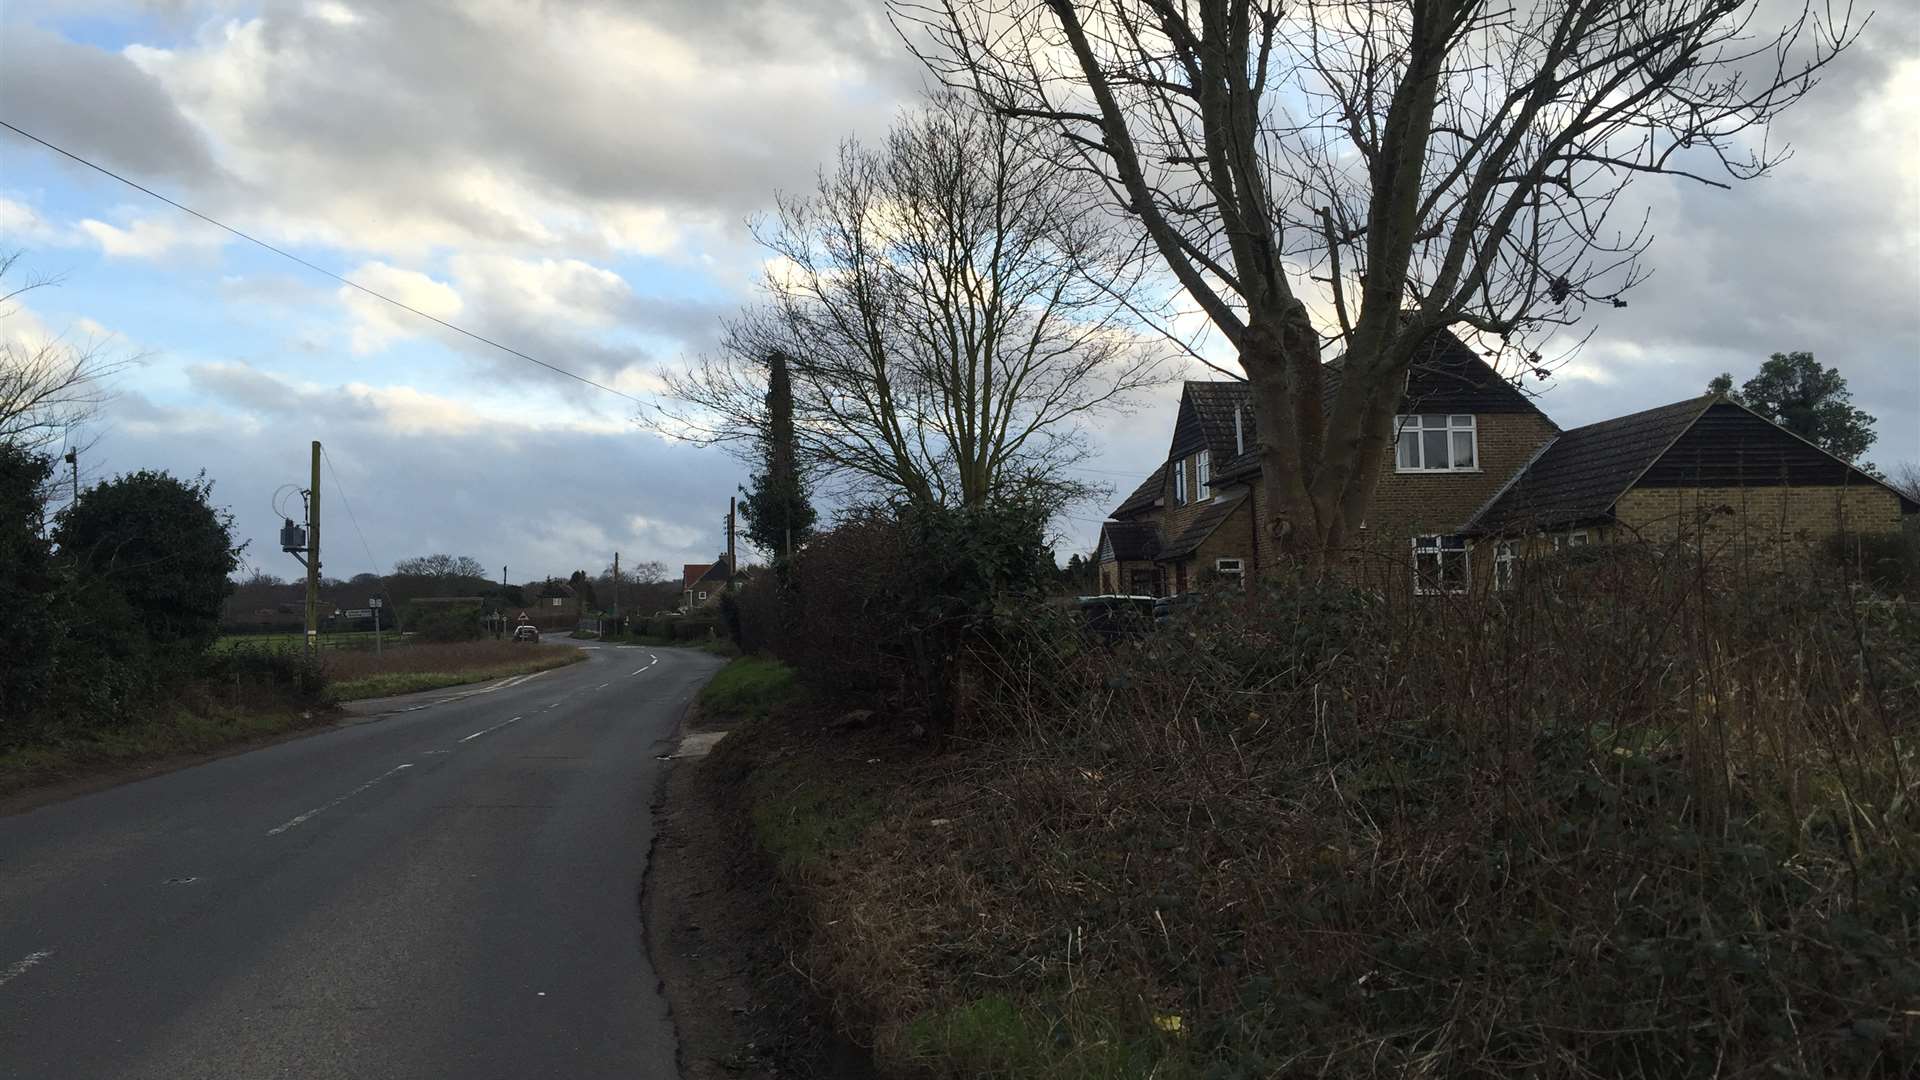 One of the planned new roads would cut straight through this quiet countryside